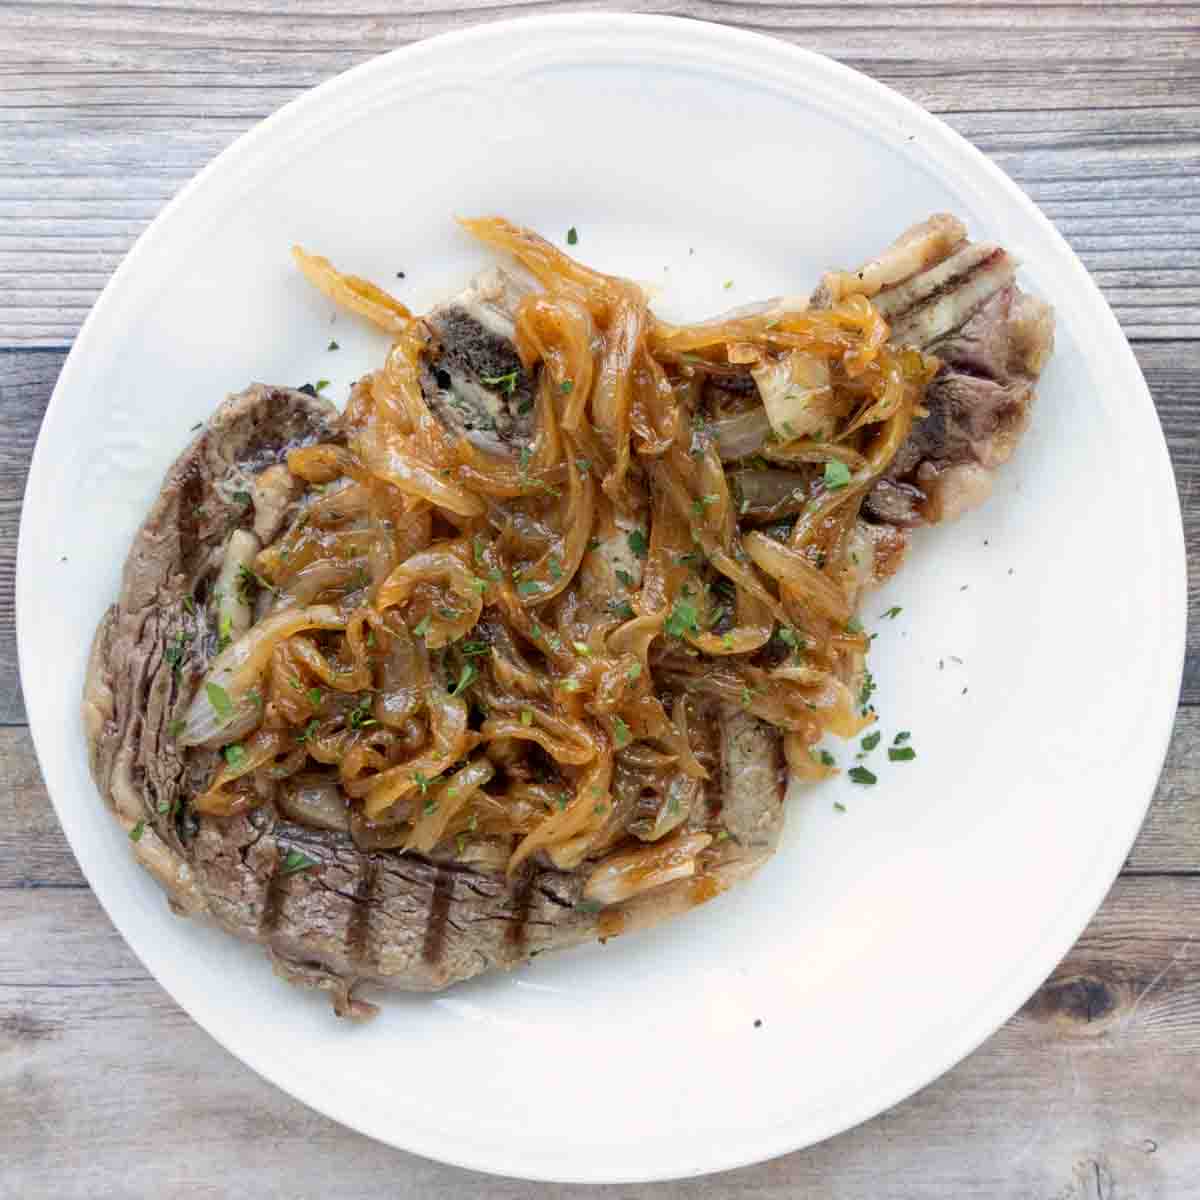 Ribeye on white plate topped with caramelized onions.